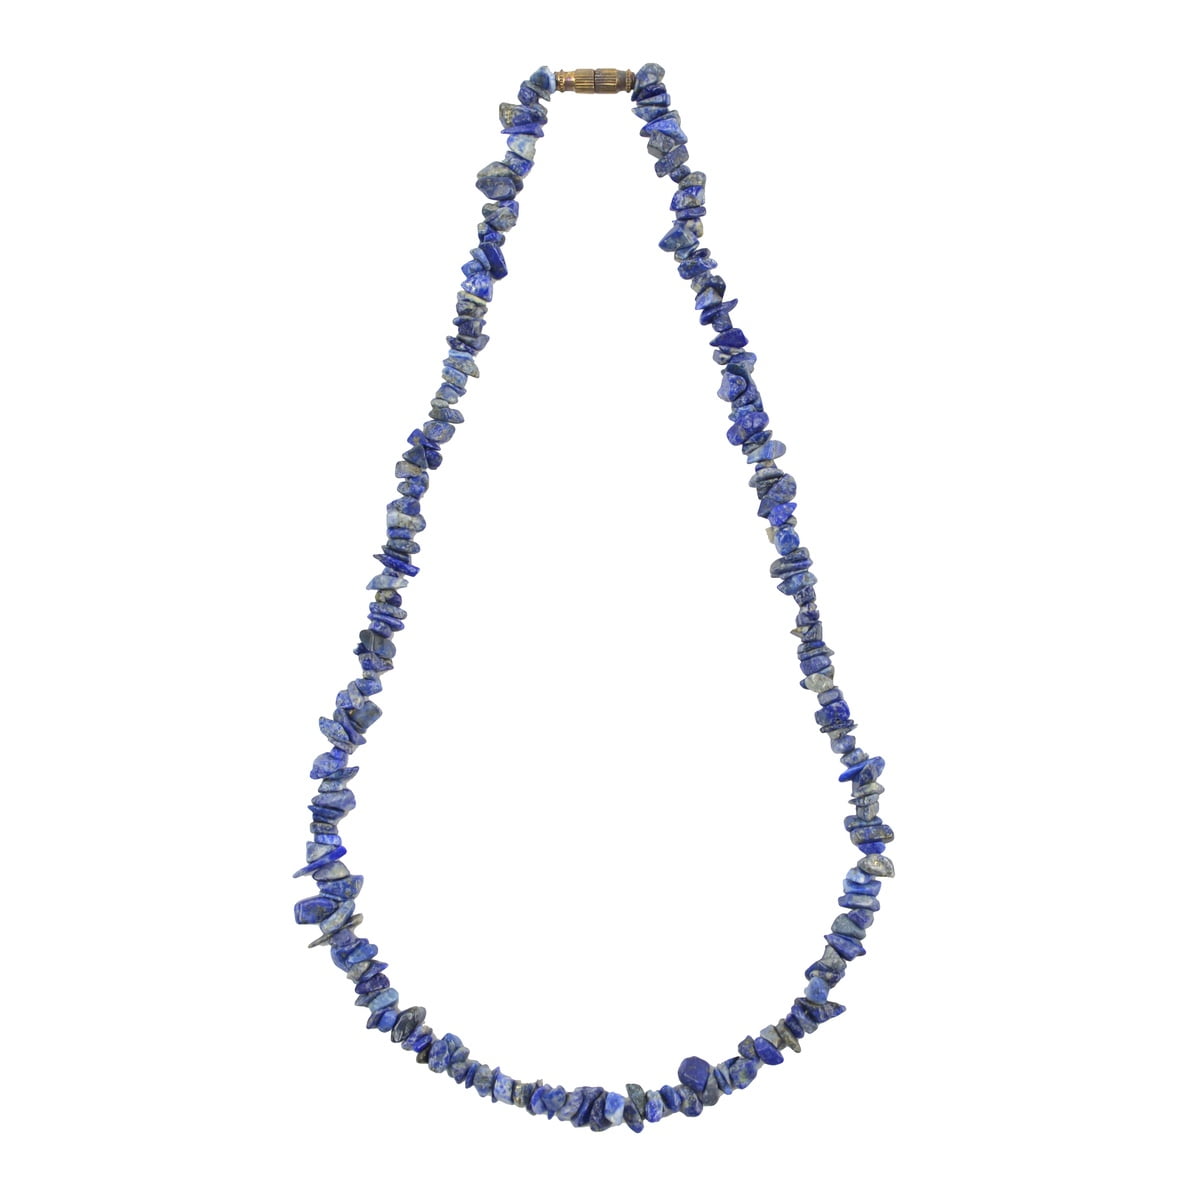 Vintage 16-18 Necklace With Faux Blue And Lapis Stone Chip Beads Used